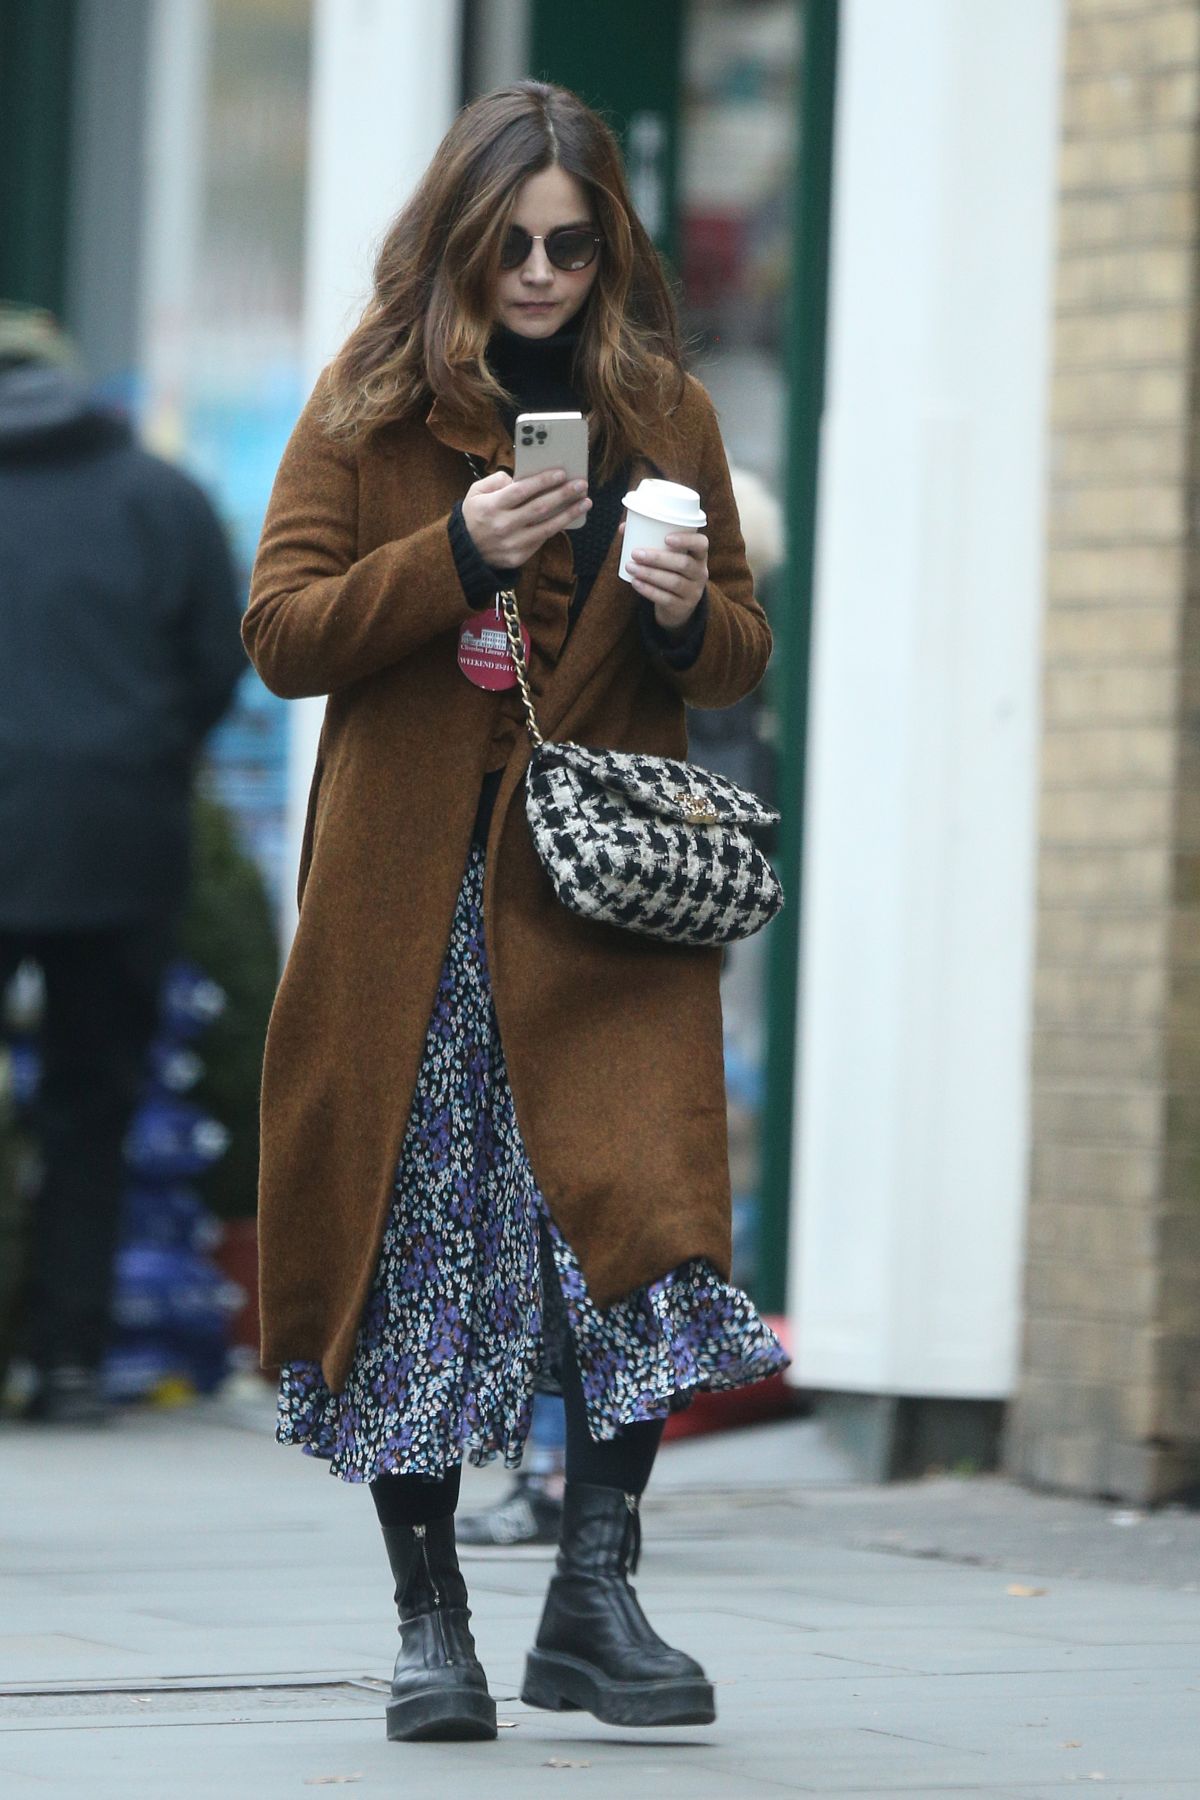 jenna-louise-coleman-out-for-coffee-in-london-11-16-2021-5.jpg